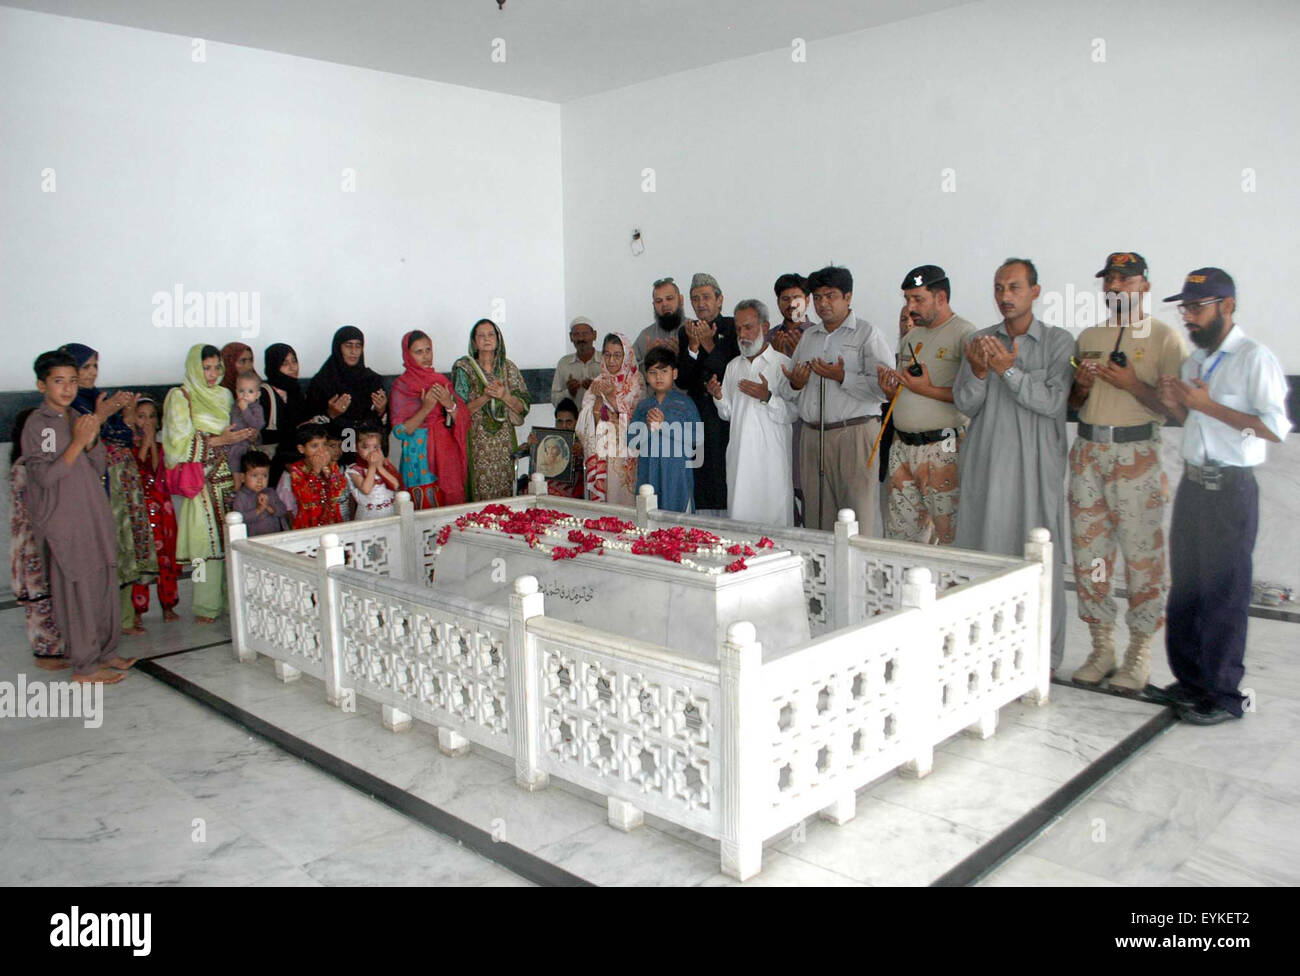 Jinnah Family members are offering prayer for departed soul of Fatima Jinnah, younger sister of Founder of Pakistan Quaid-e-Azam Muhammad Ali Jinnah on occasion of her birthday anniversary, on Fatima's grave in Karachi on Friday, July 31, 2015. Stock Photo